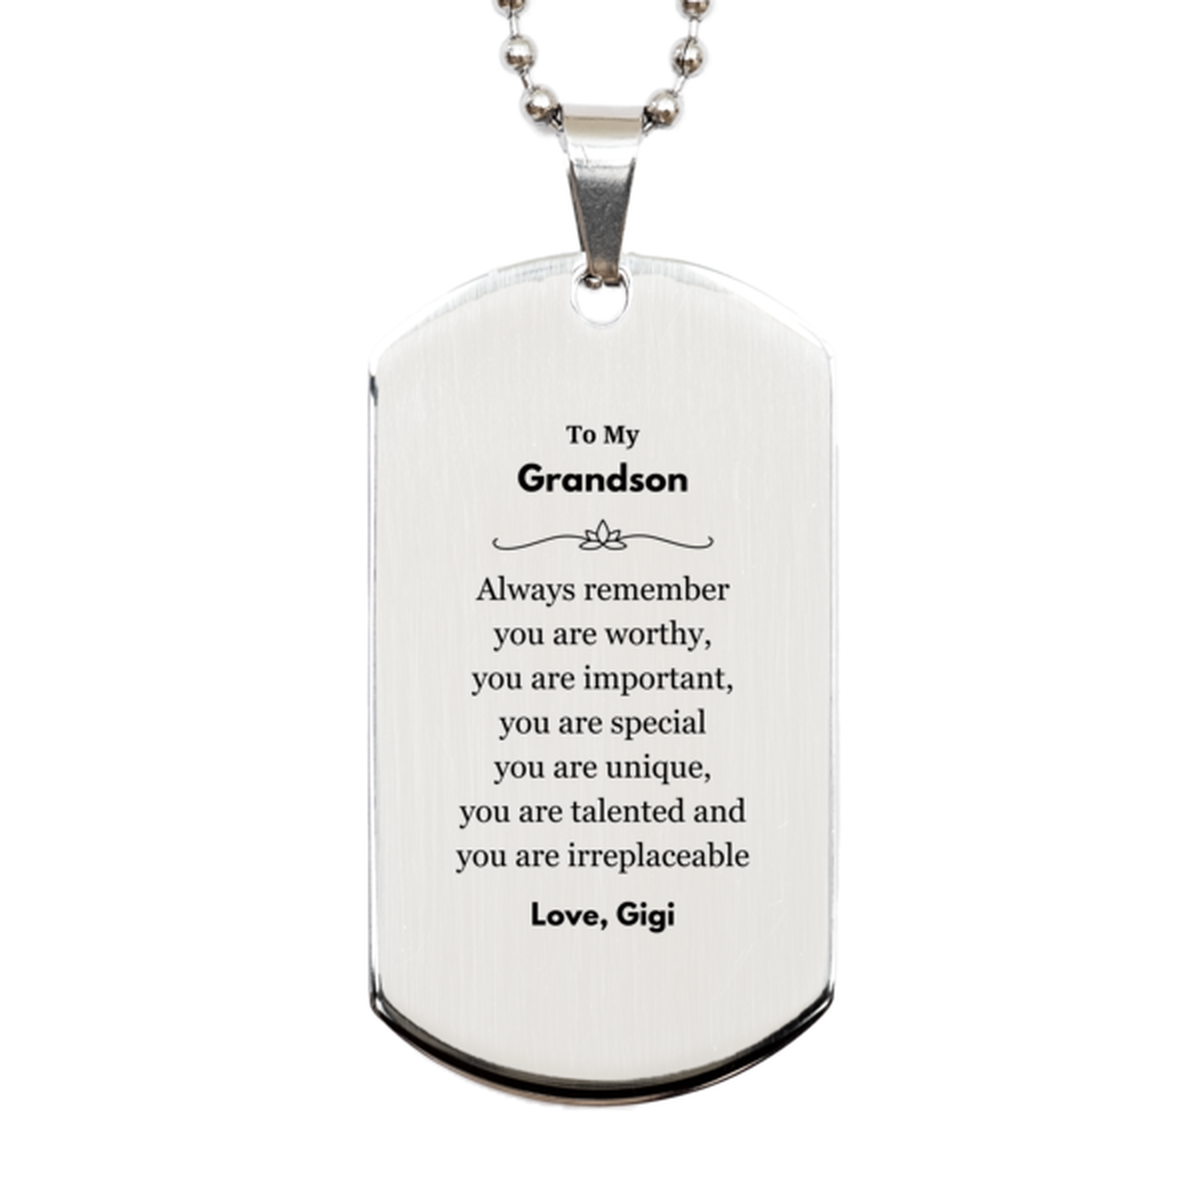 Grandson Birthday Gifts from Gigi, Inspirational Silver Dog Tag for Grandson Christmas Graduation Gifts for Grandson Always remember you are worthy, you are important. Love, Gigi